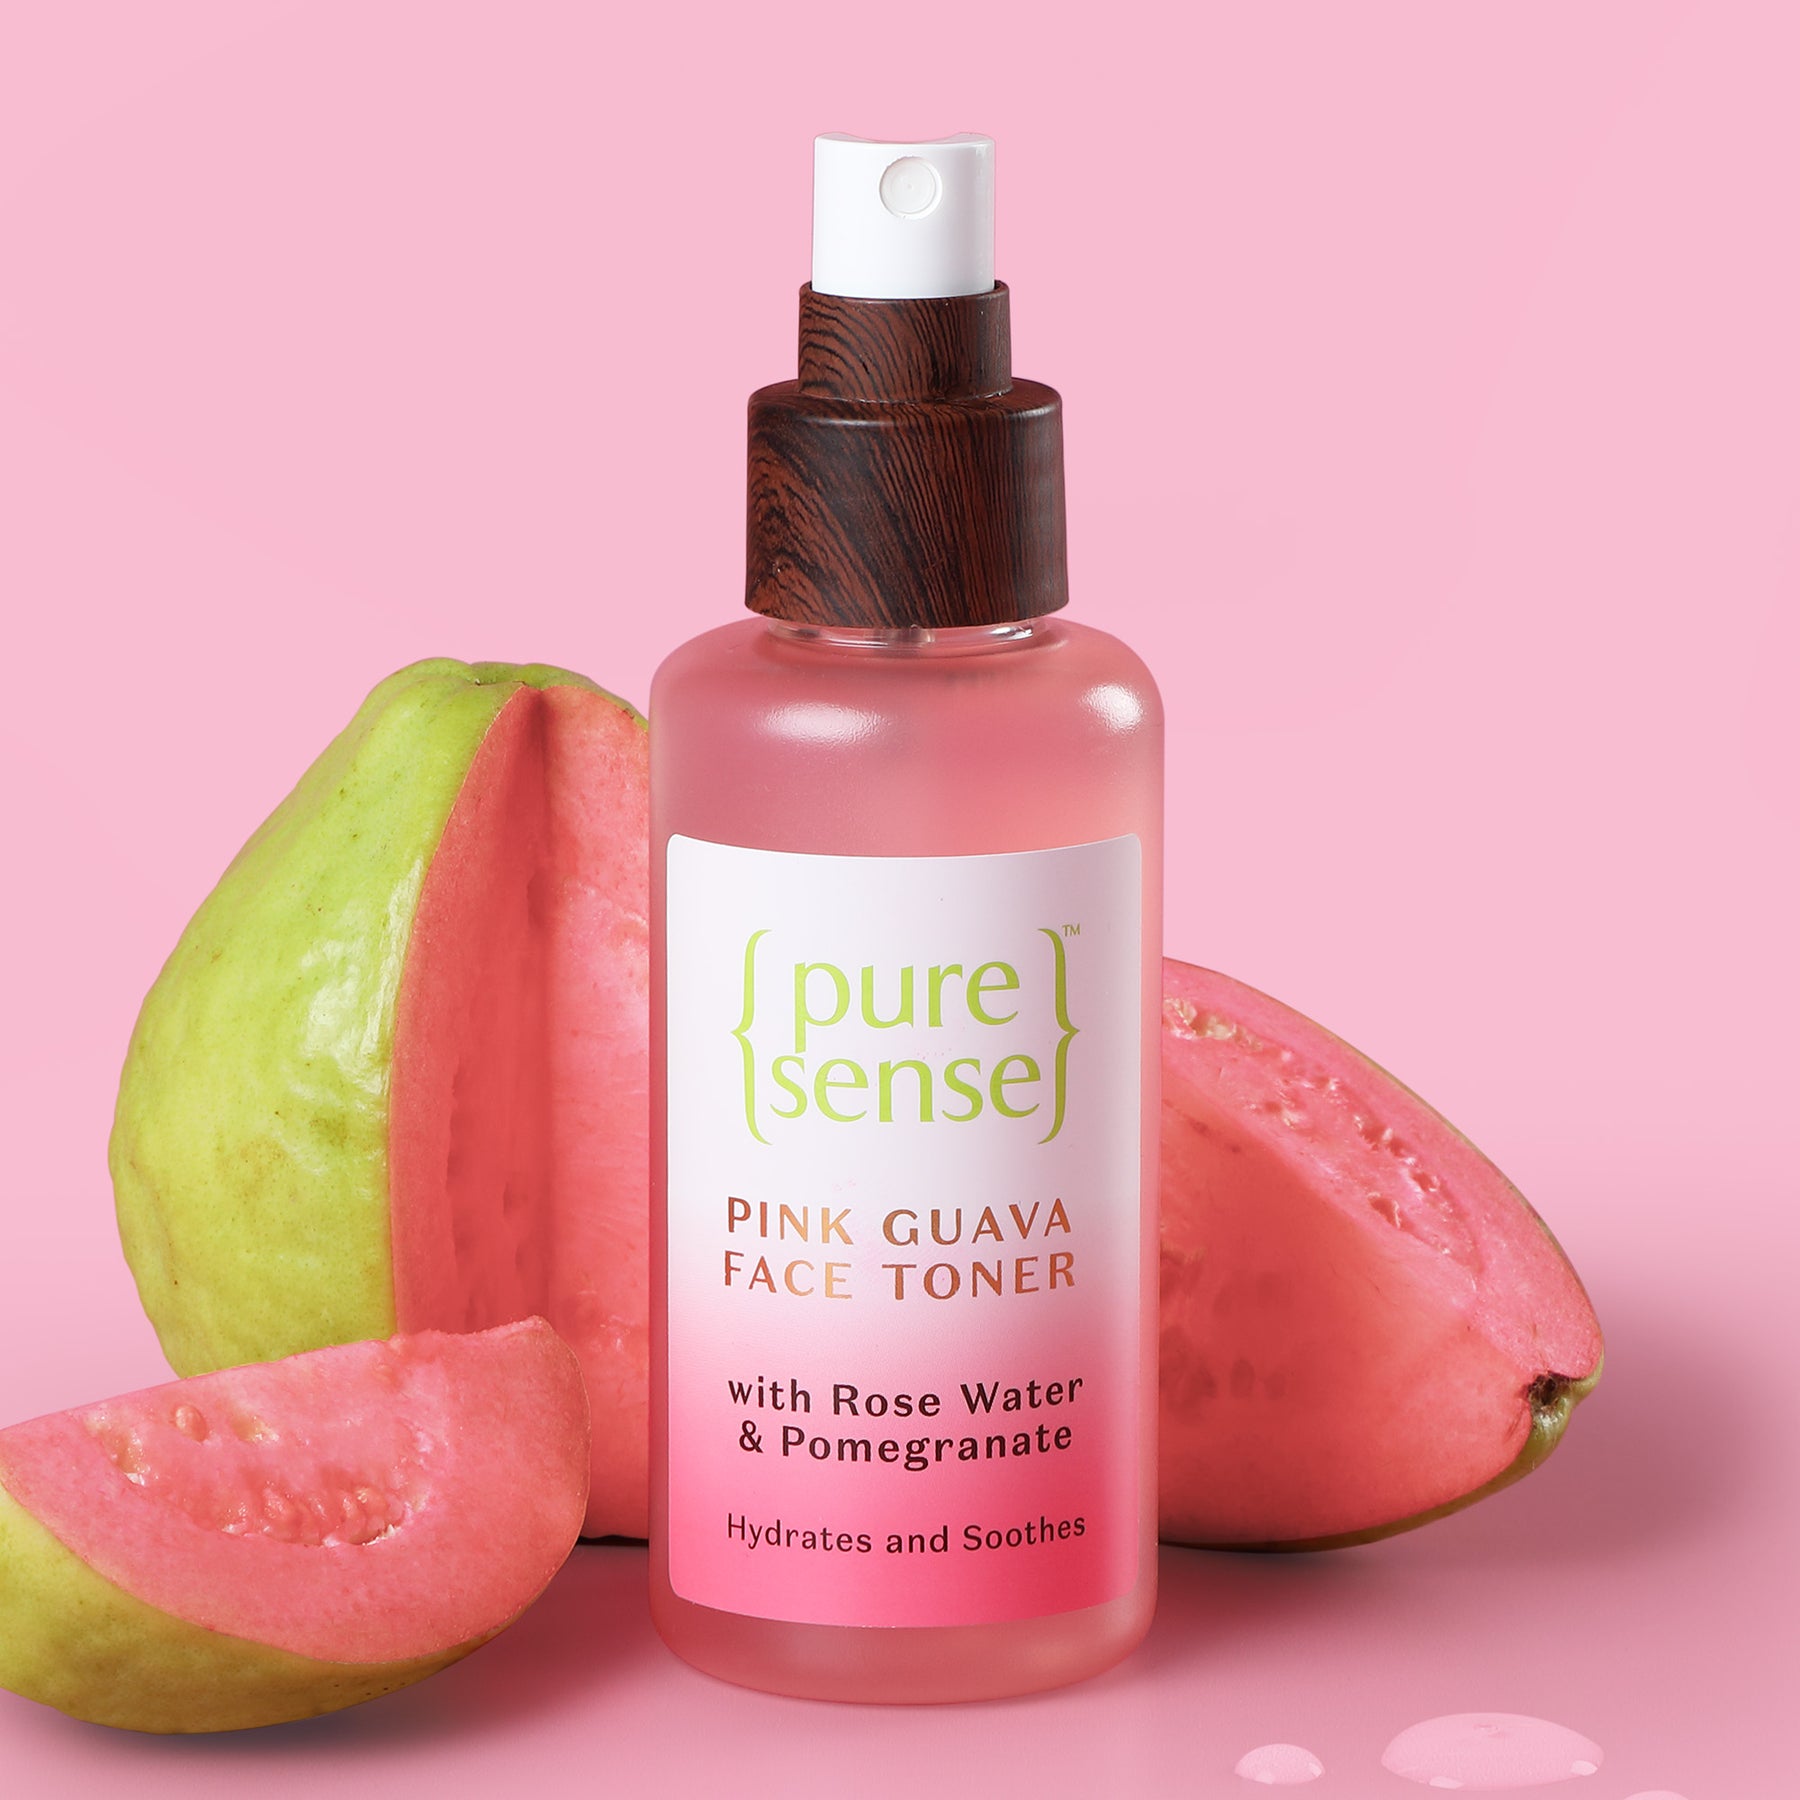 Pink Guava Face Toner | From the makers of Parachute Advansed | 100ml